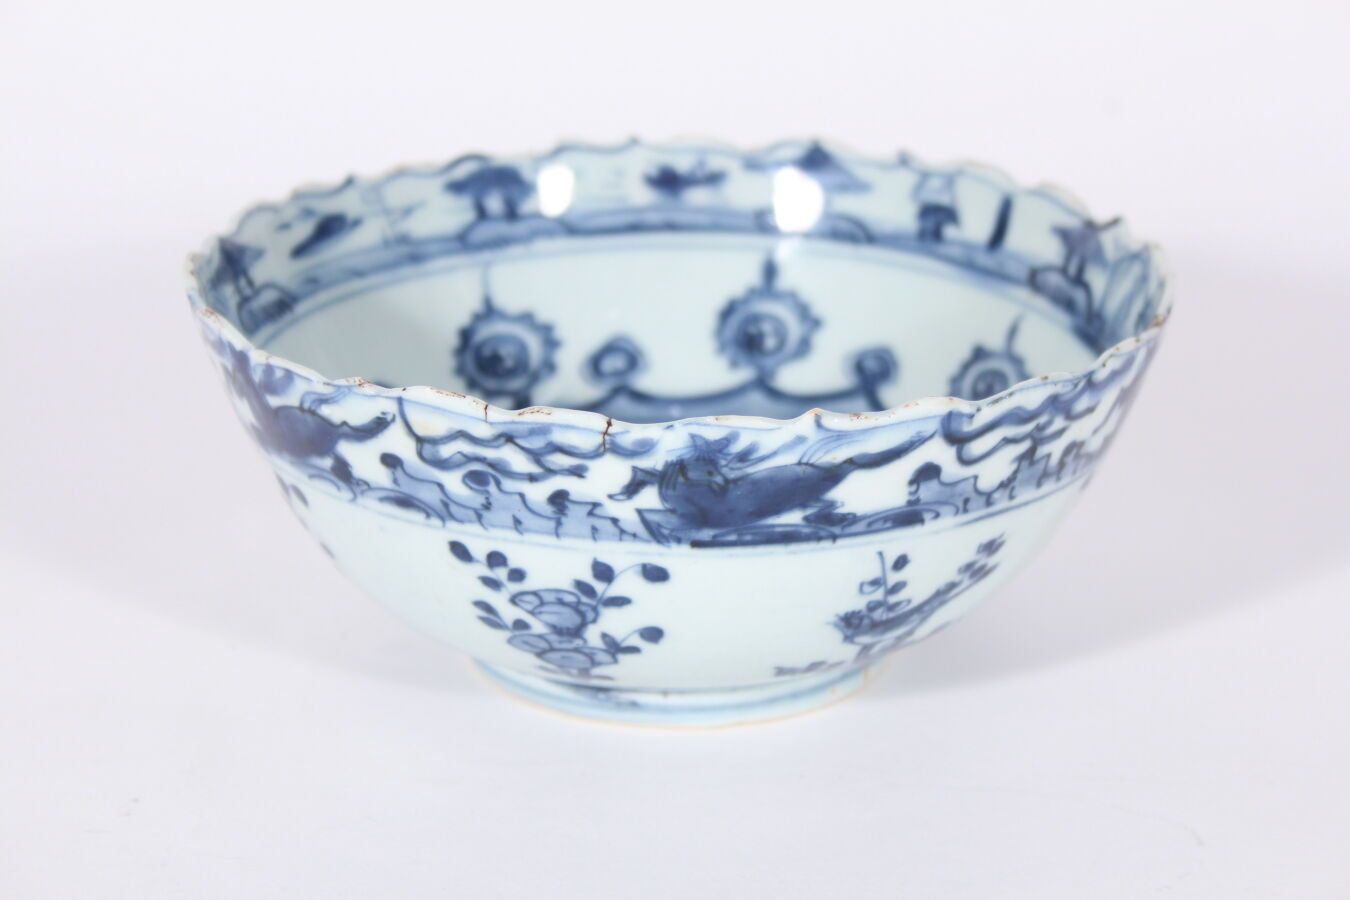 Null Blue and white porcelain bowl
China, 16th/17th century
Decorated with a cen&hellip;